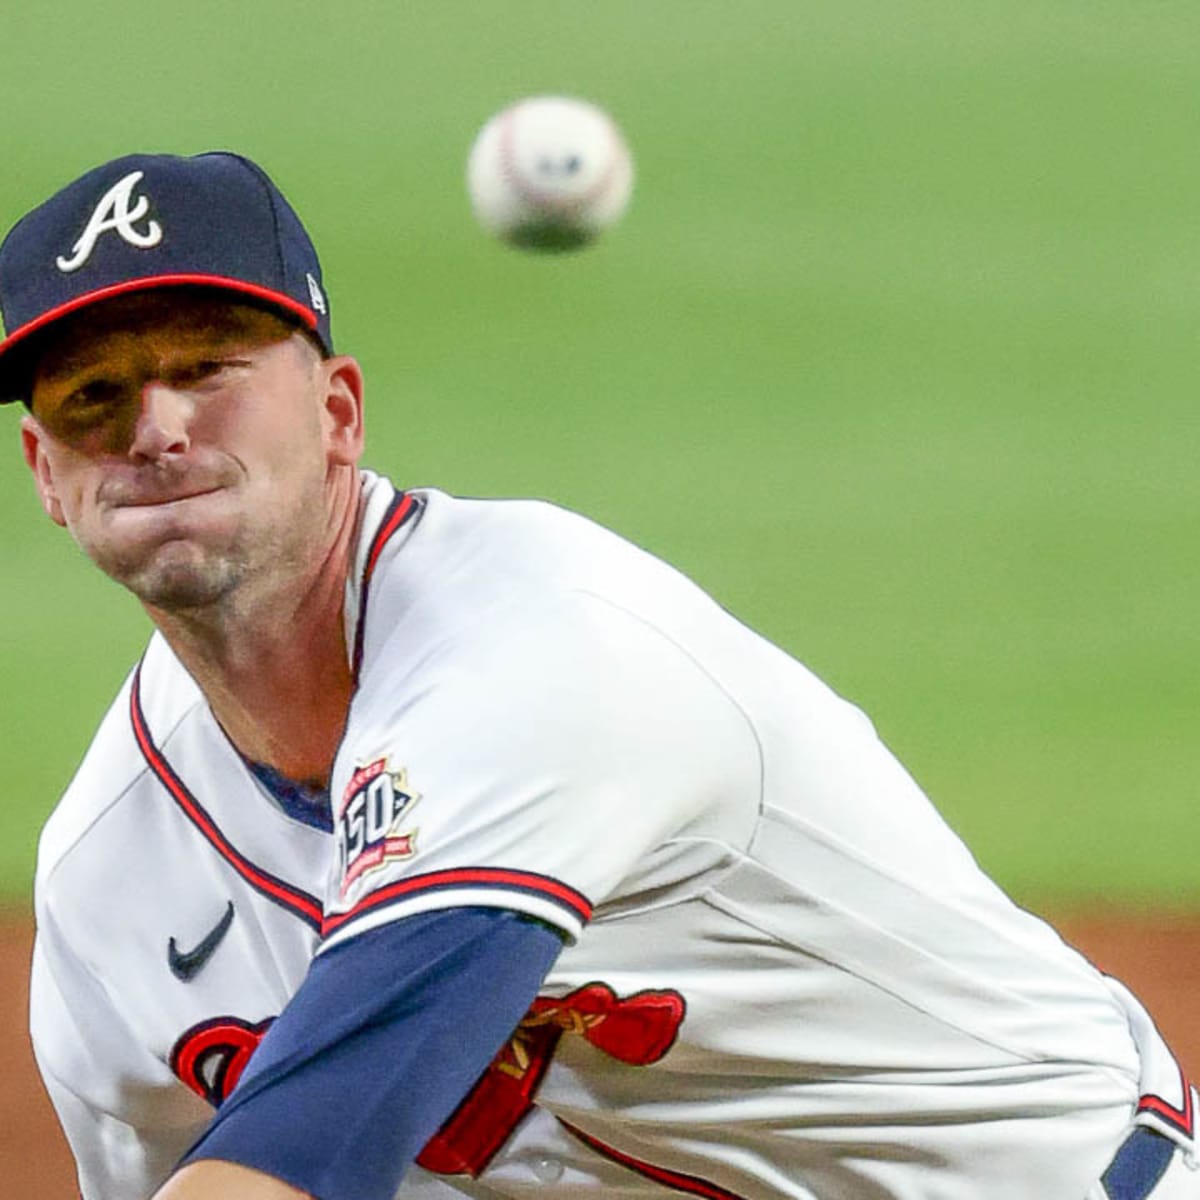 Former Atlanta Brave weighs in on Braves advancing to World Series